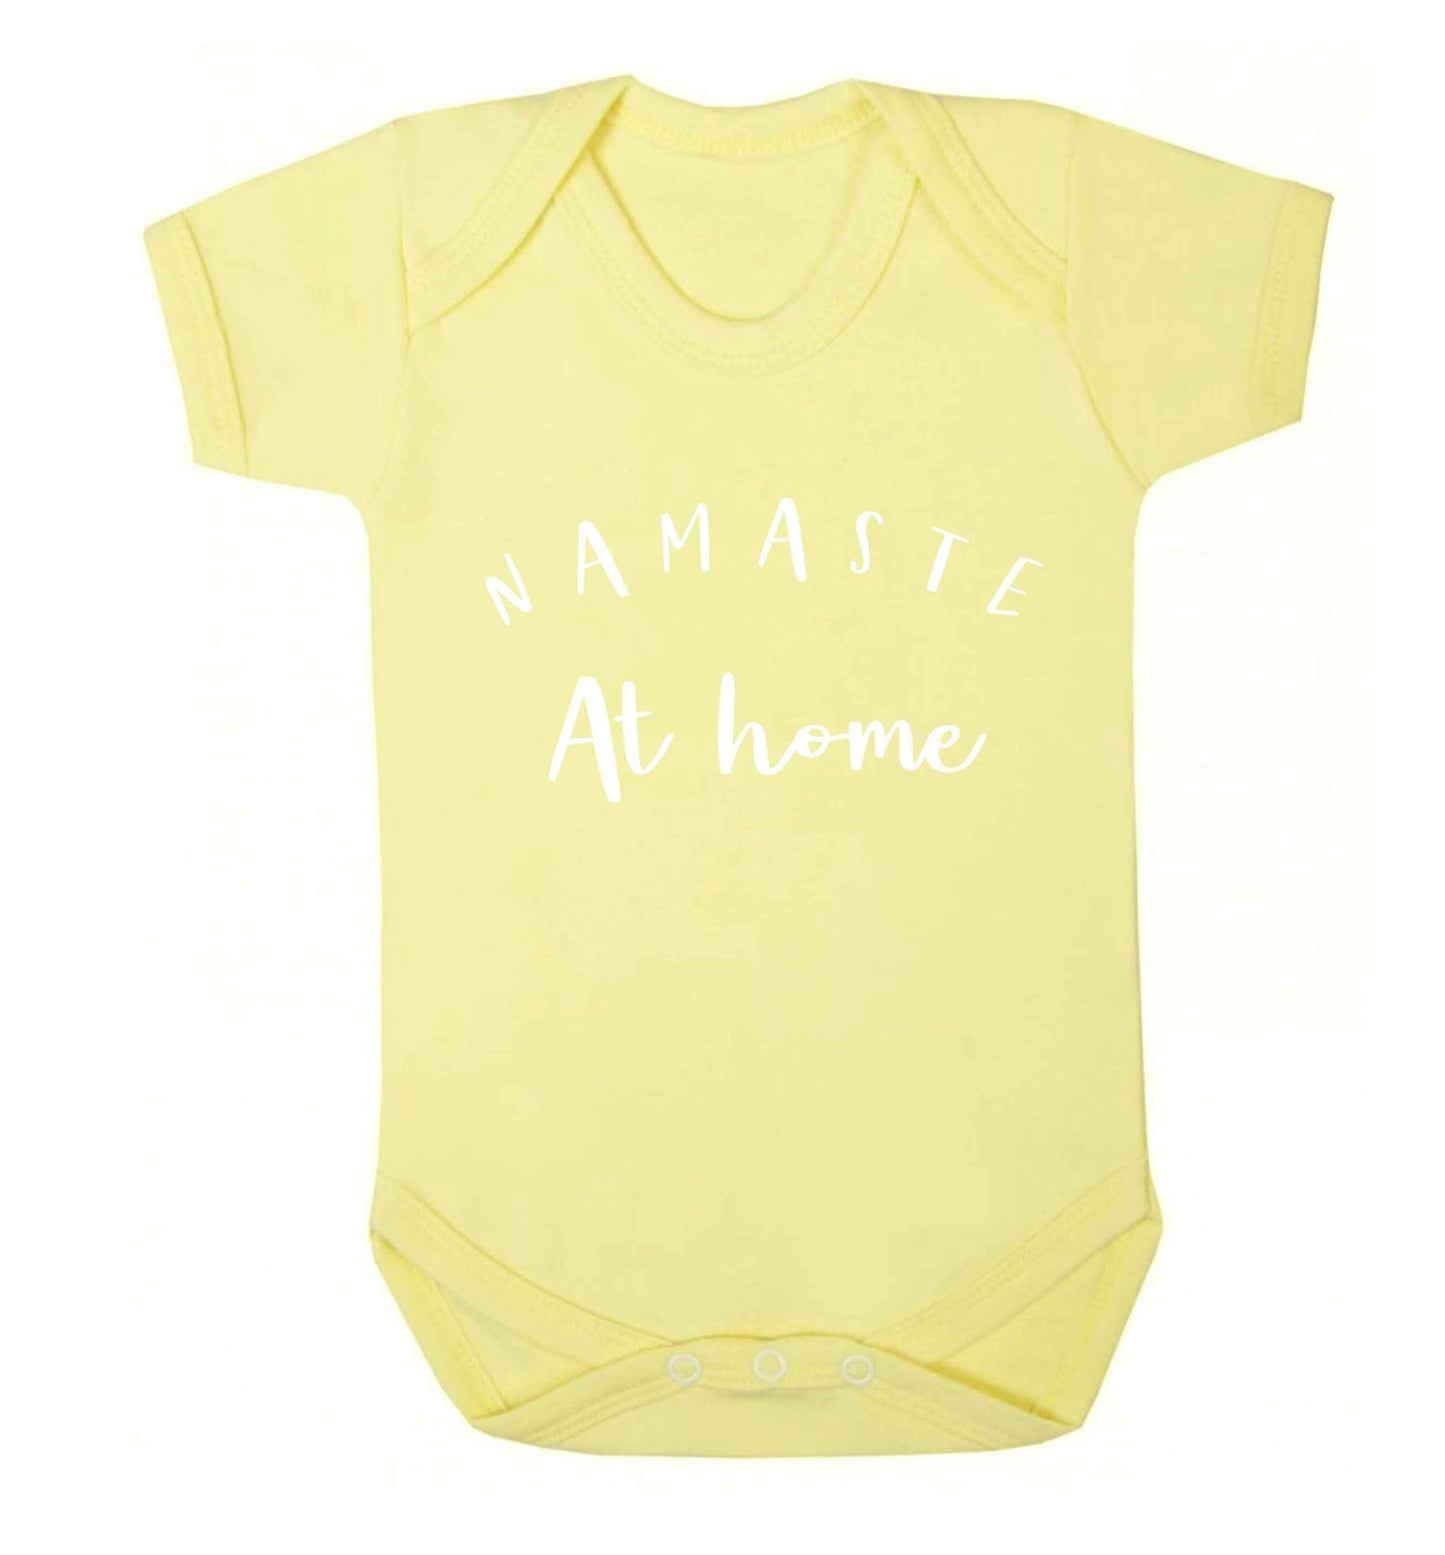 Namaste at home Baby Vest pale yellow 18-24 months